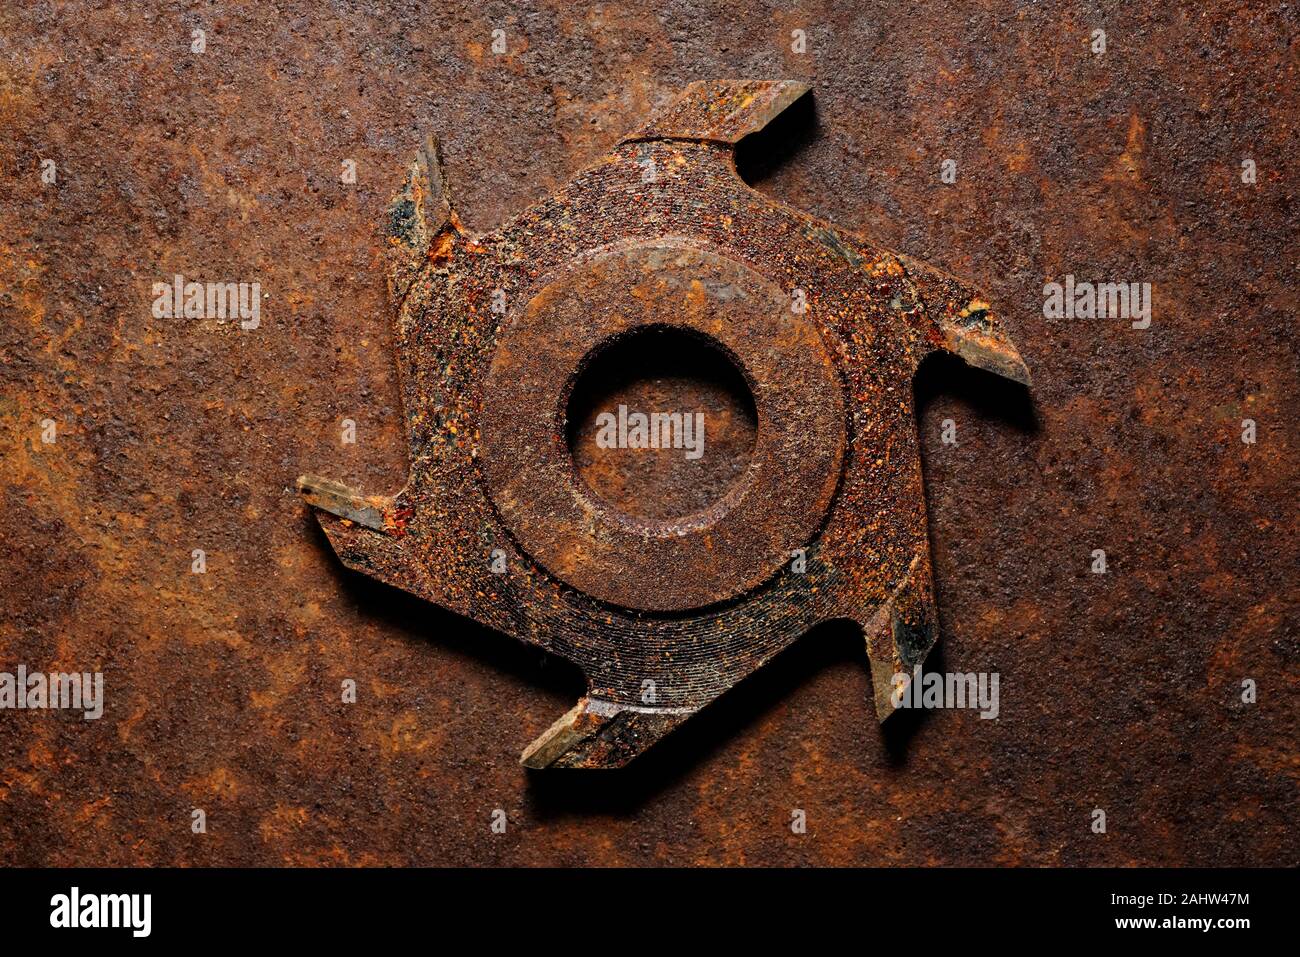 Backgrounds and textures: very old rusty milling cutter, industrial abstract Stock Photo